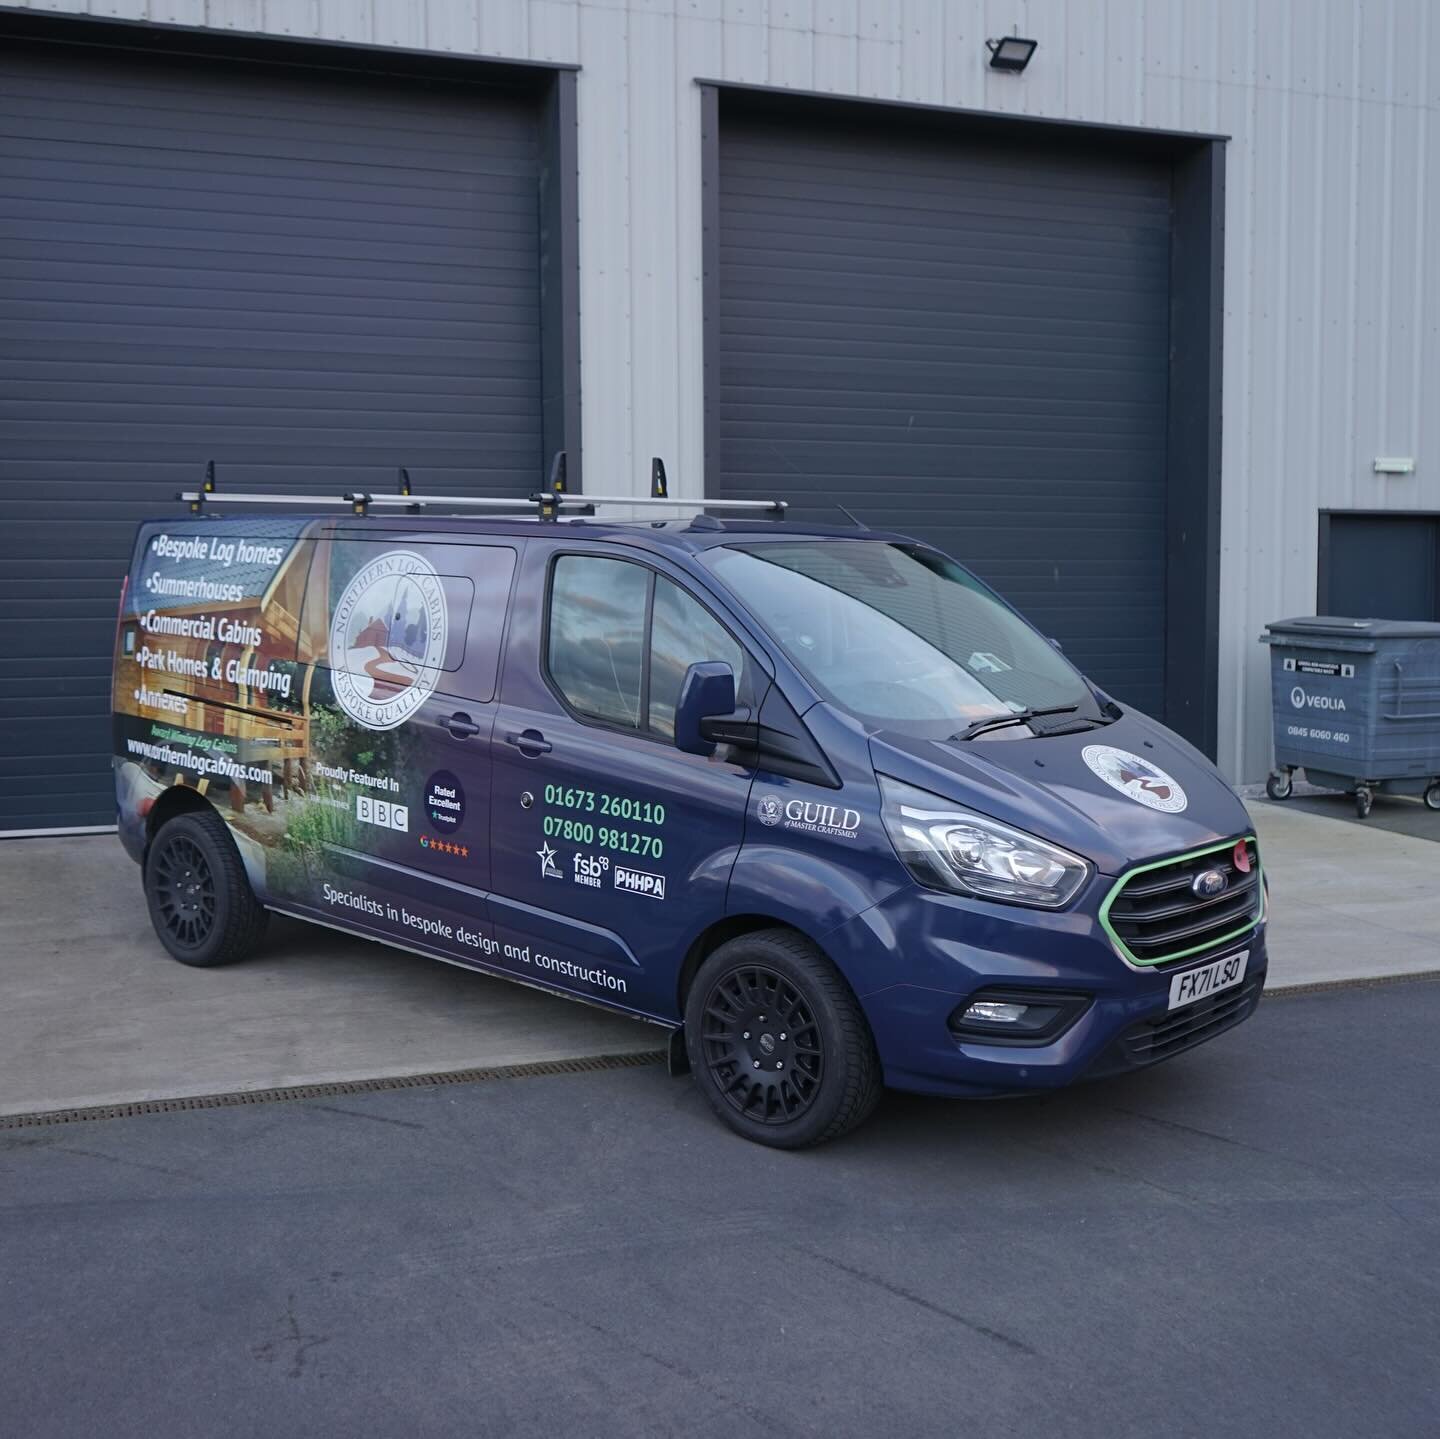 This Transit Custom Has Been Transformed Into A Mobile Ad For @northernlogcabinsltd . We Stripped The Old Signwriting And Gave It A Full Printed Wrap! 

Need A Vehicle Branding? 

Get In Touch And Let Us Transform Your Vehicles. We Can Design And Ins